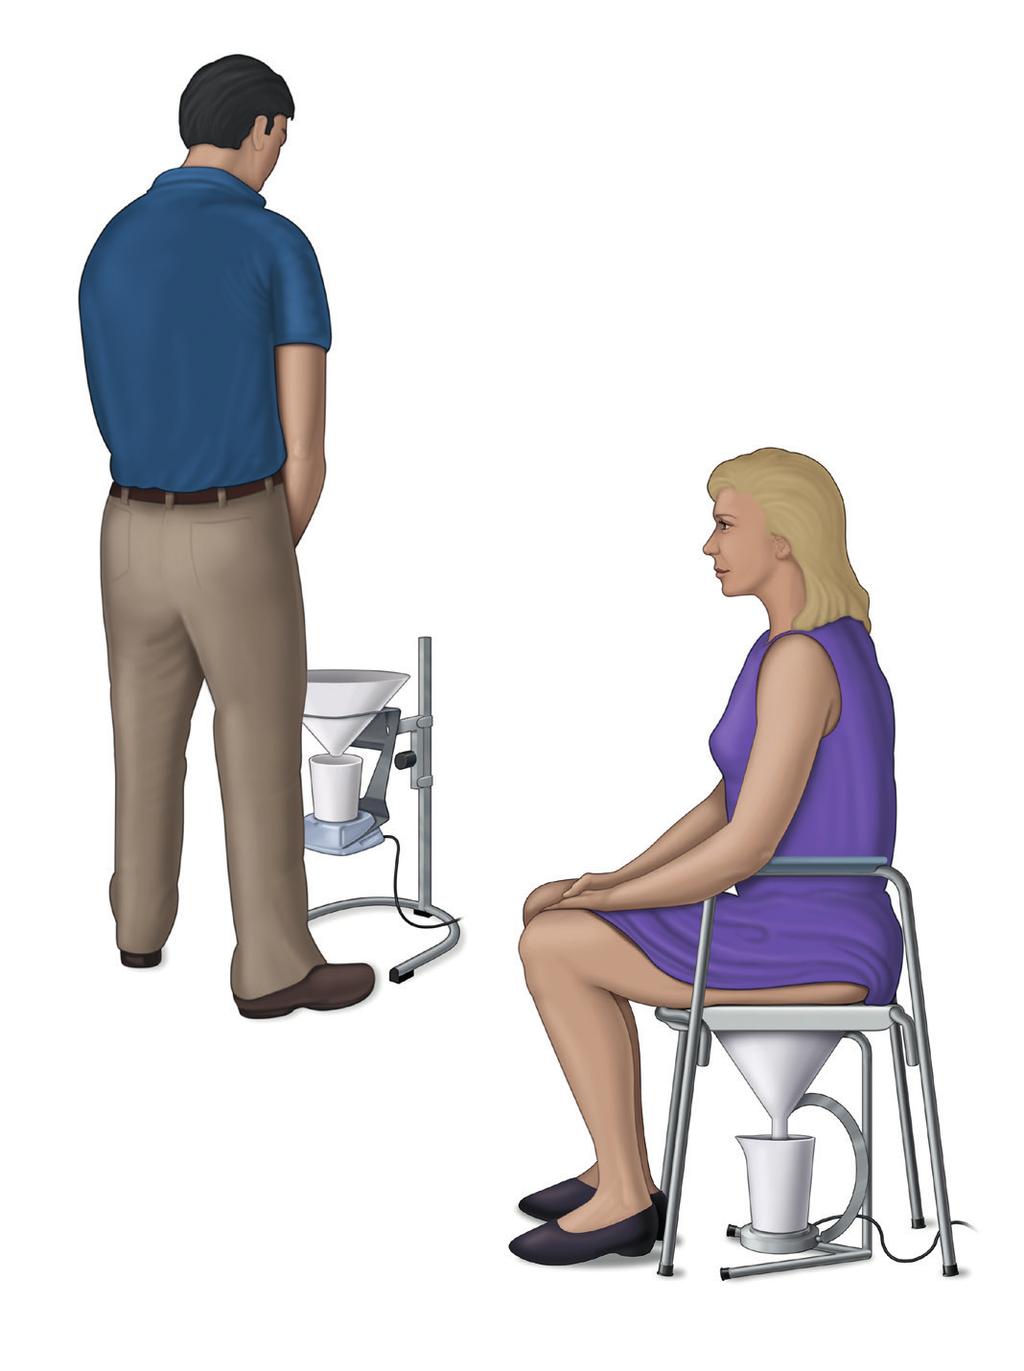 Urine test You will need to give some of your urine for testing. The test will show if you have a urinary tract infection and if there are traces of blood or sugar in the urine.